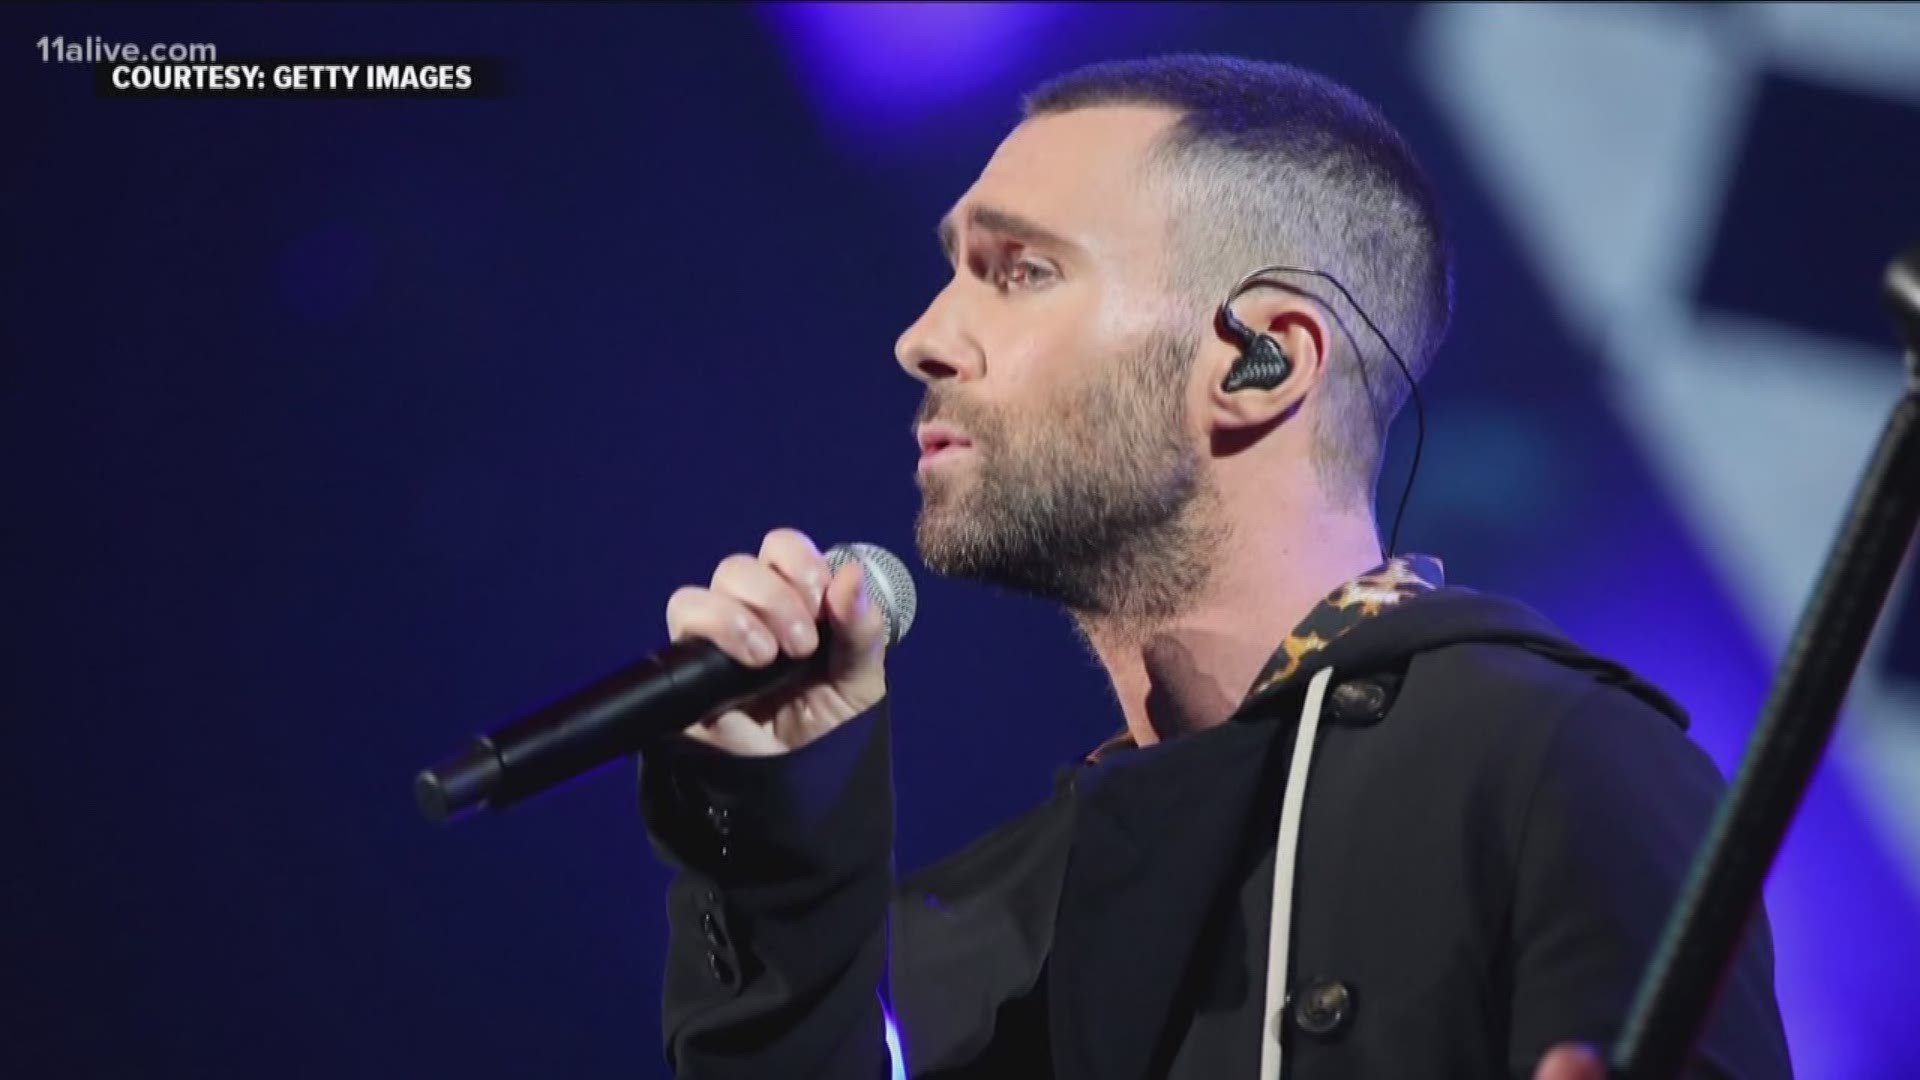 A new report claims Maroon 5 has reached out to more than half-dozen stars to appear as featured guests and almost all have said -nah.